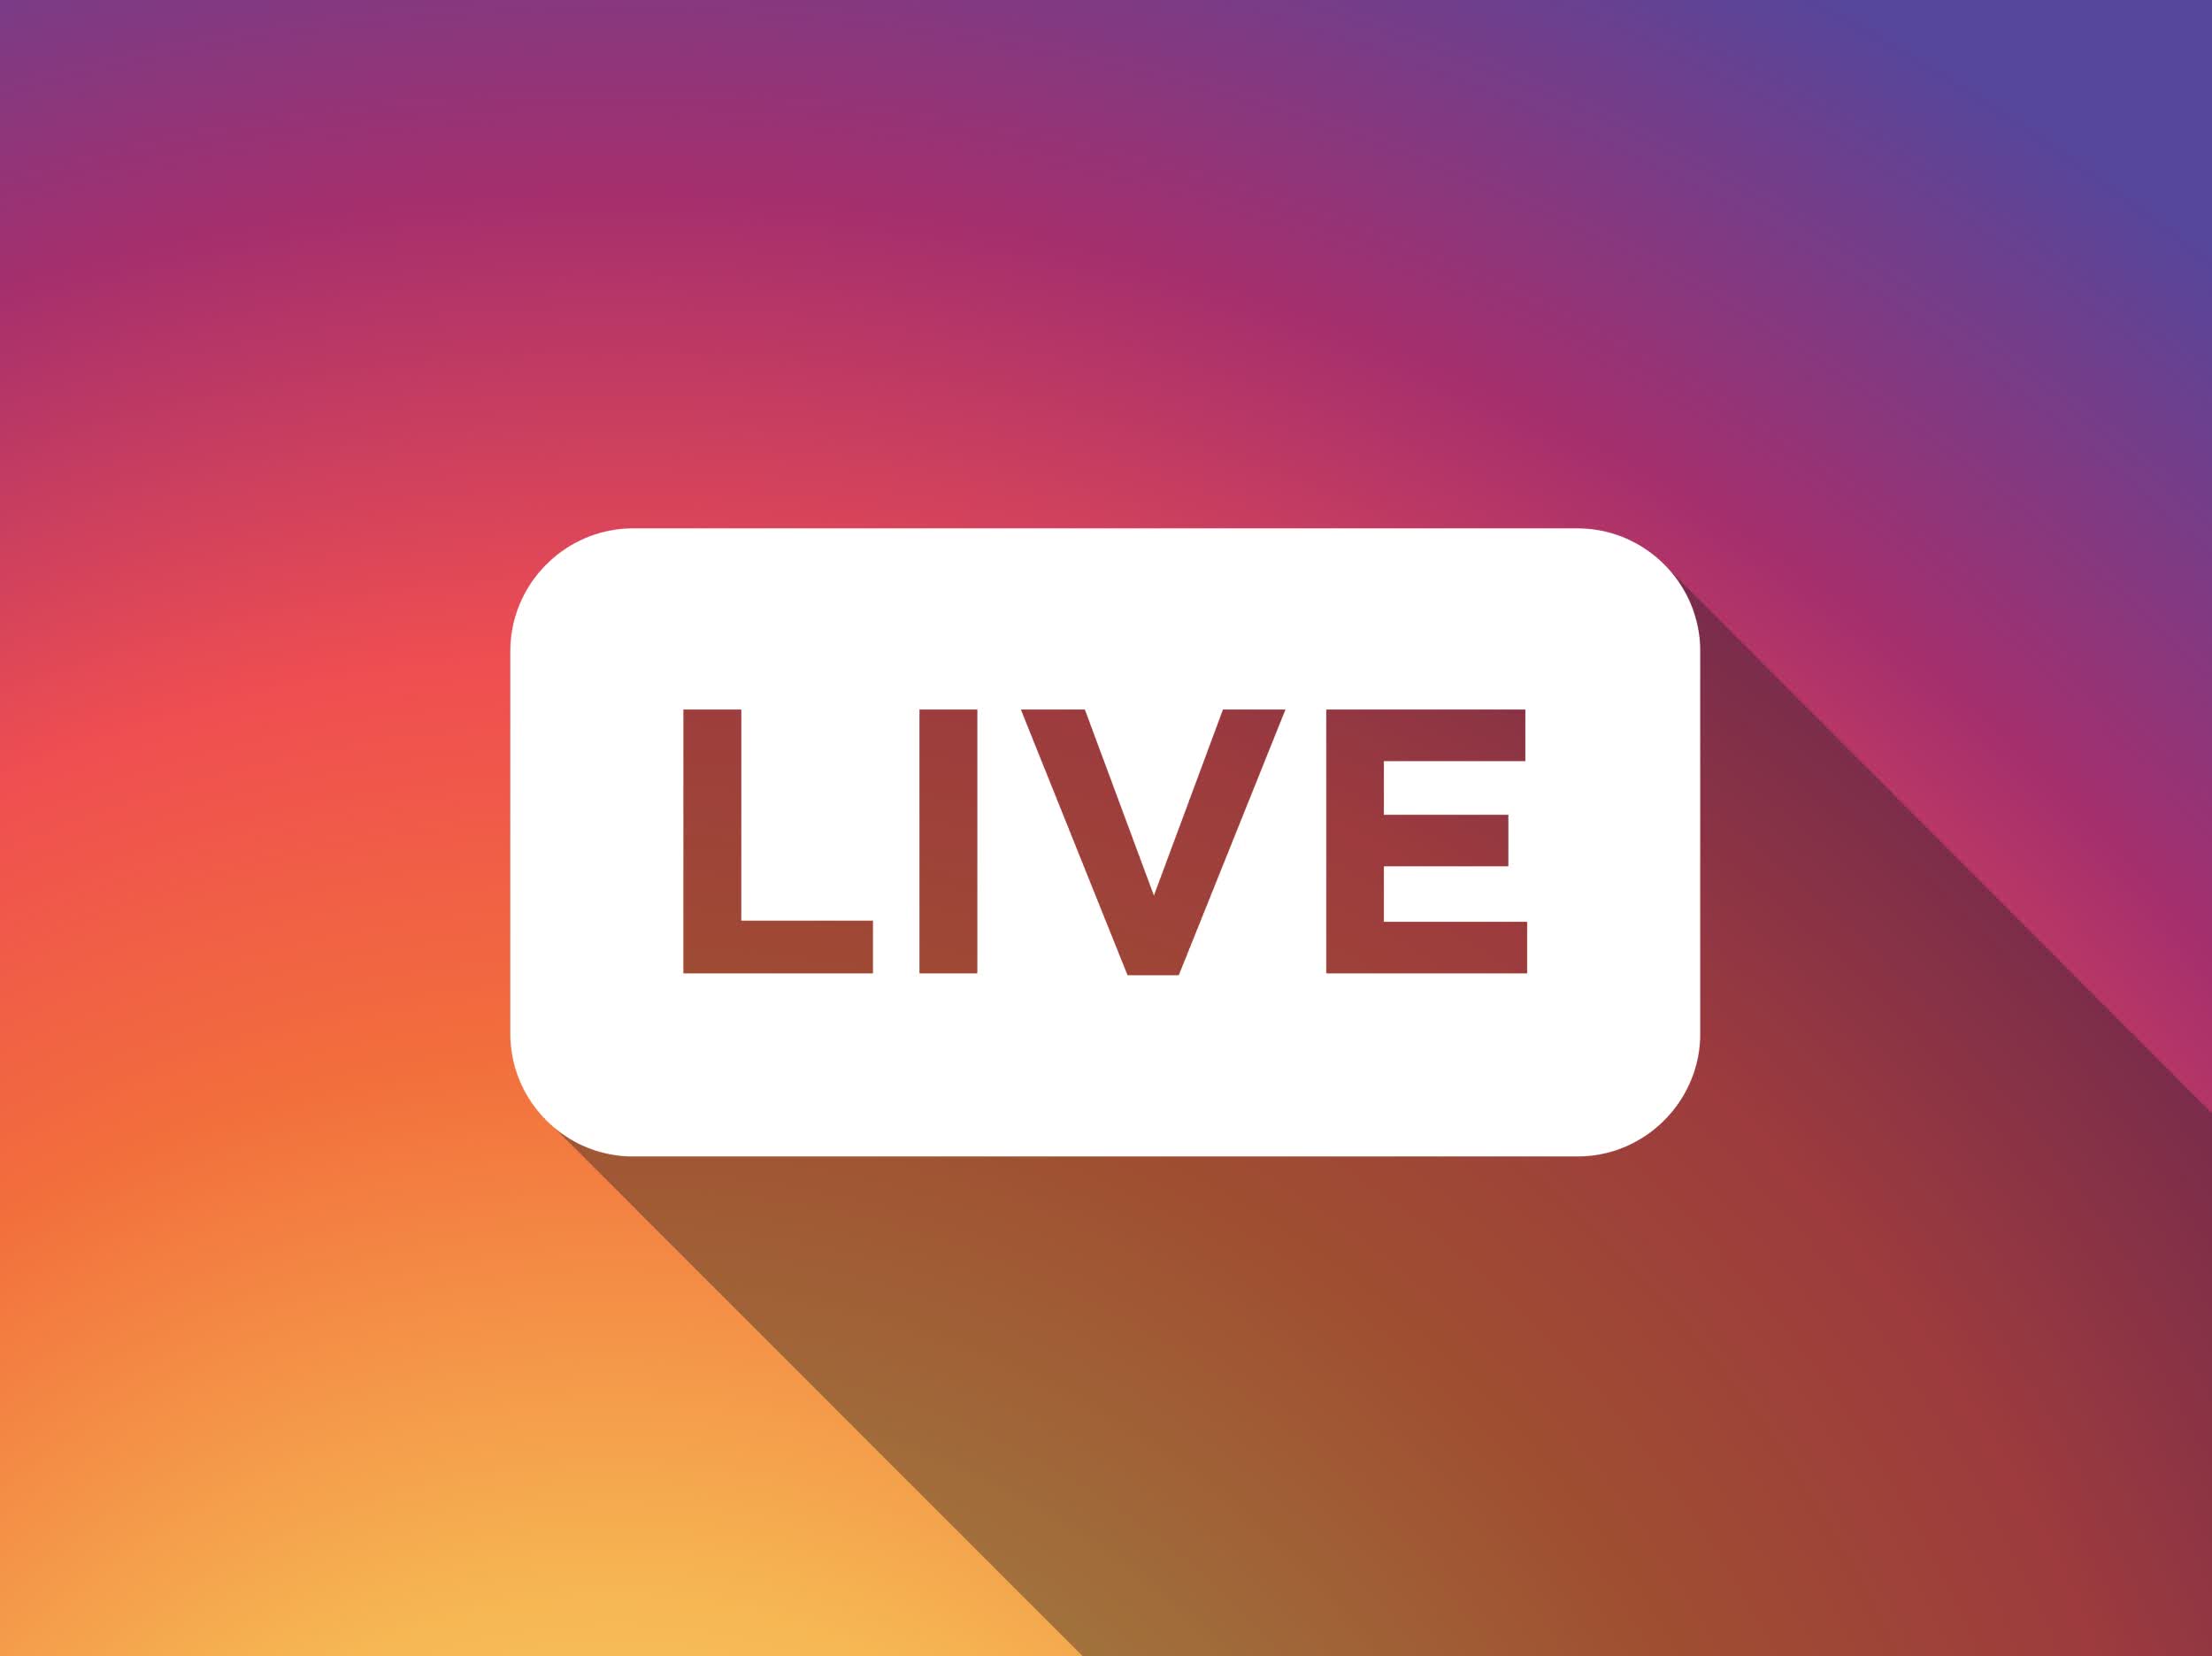 Instagram Live Rooms lets up to four people broadcast simultaneously